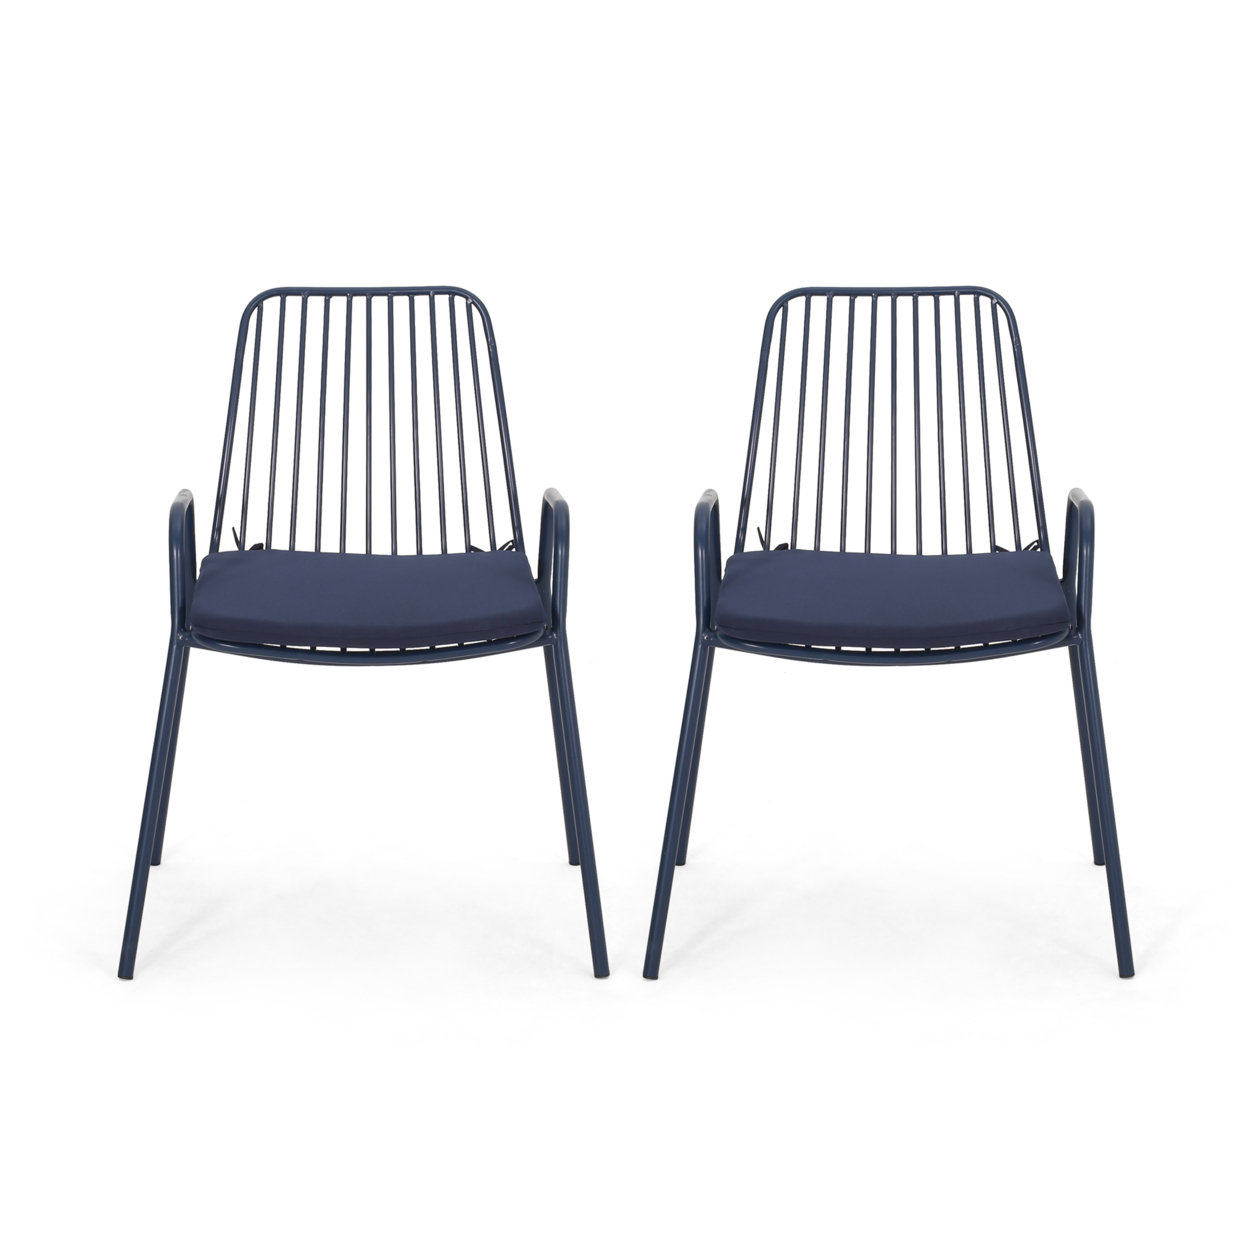 Kaitlyn Outdoor Modern Iron Club Chair With Cushion (Set Of 2) - Navy Blue